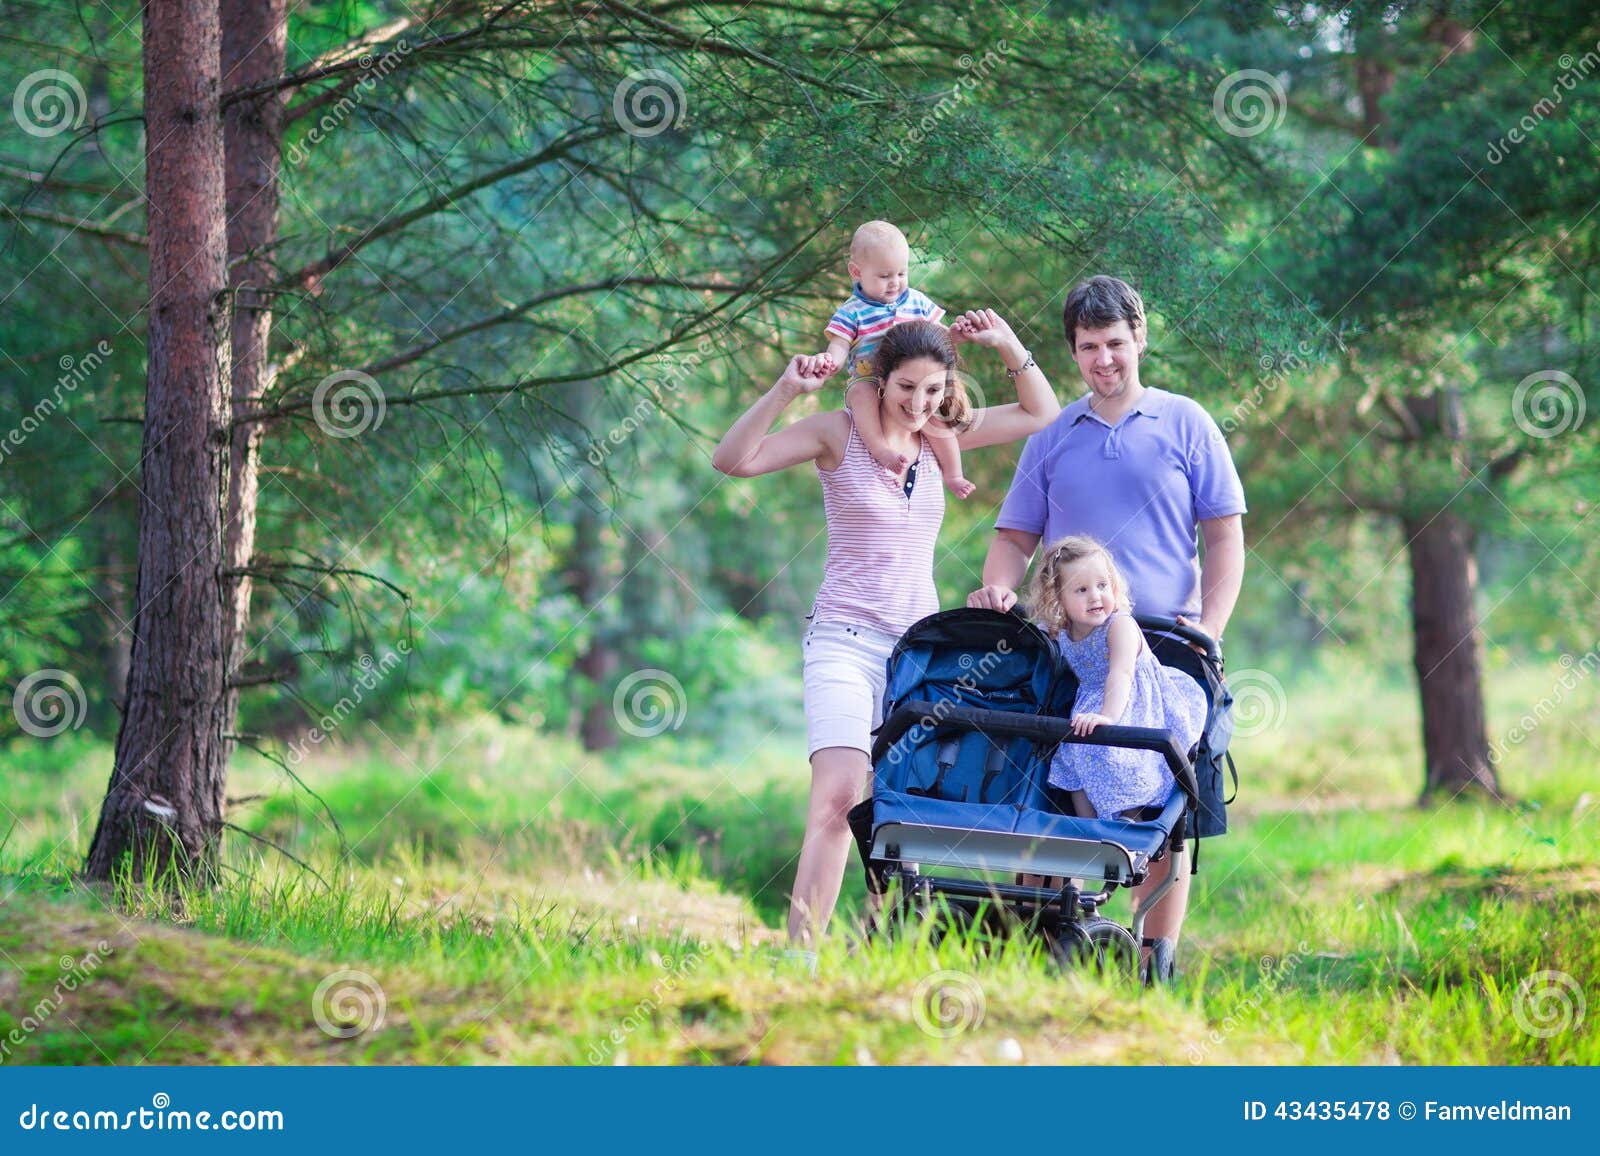 active parent hiking two kids stroller family young parents their little children adorable toddler girl cute 43435478